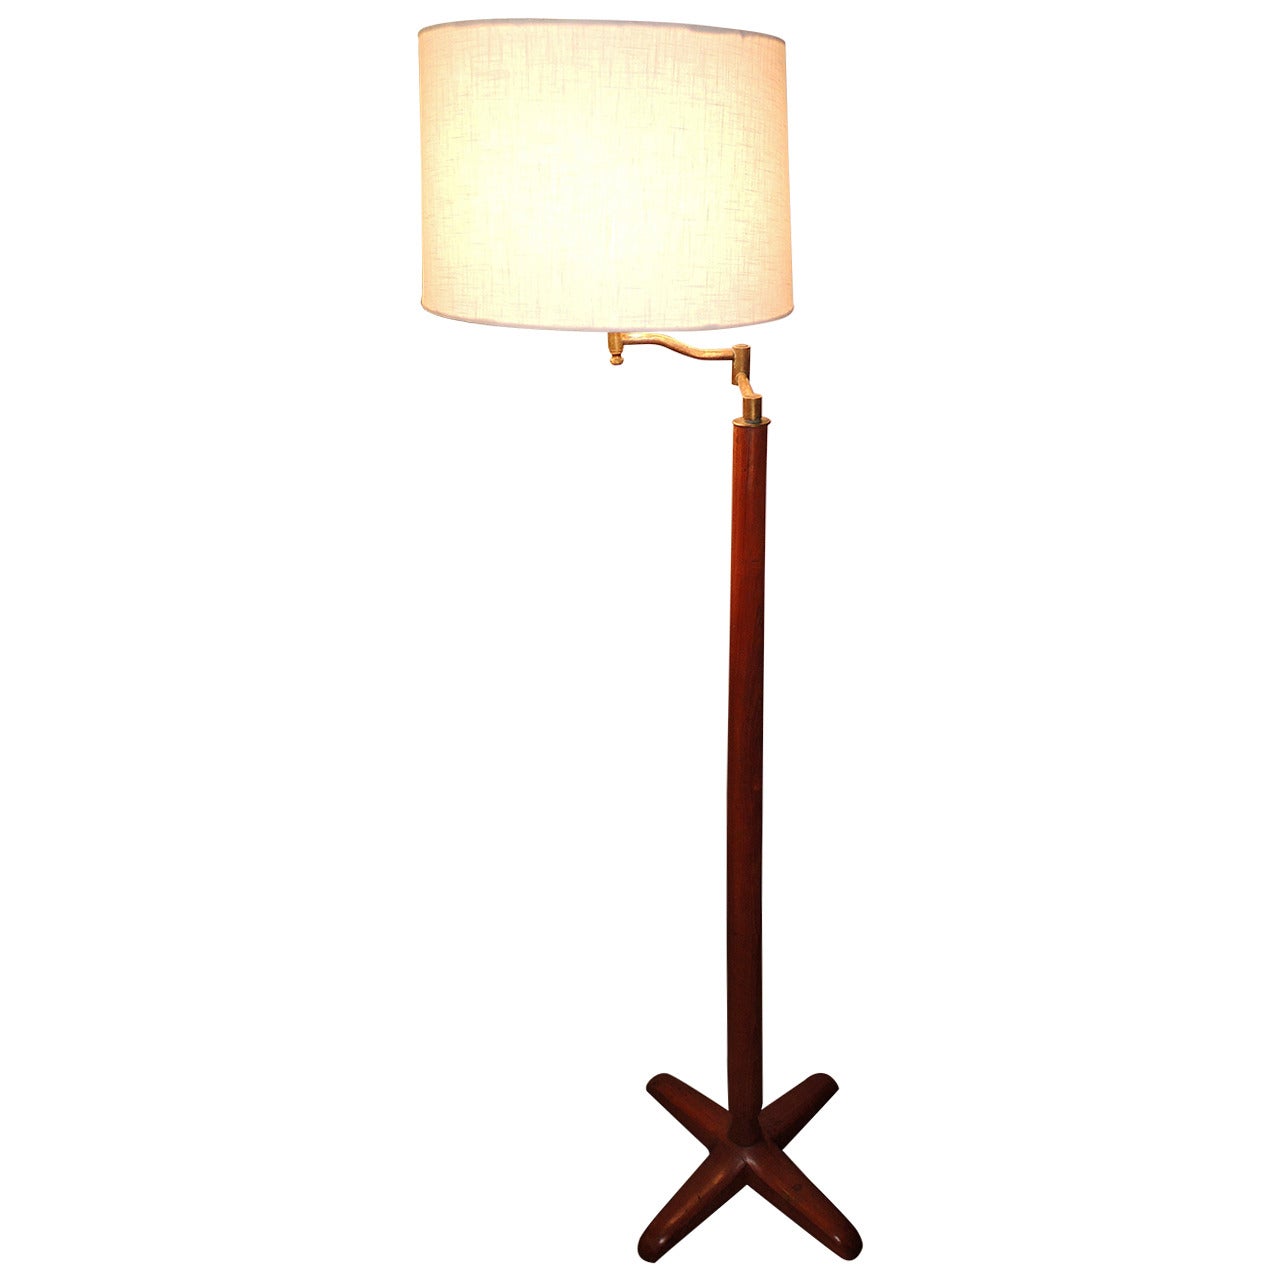 Colonial Indian Mahogany Floor Lamp with Adjustable Brass Arm, circa 1920